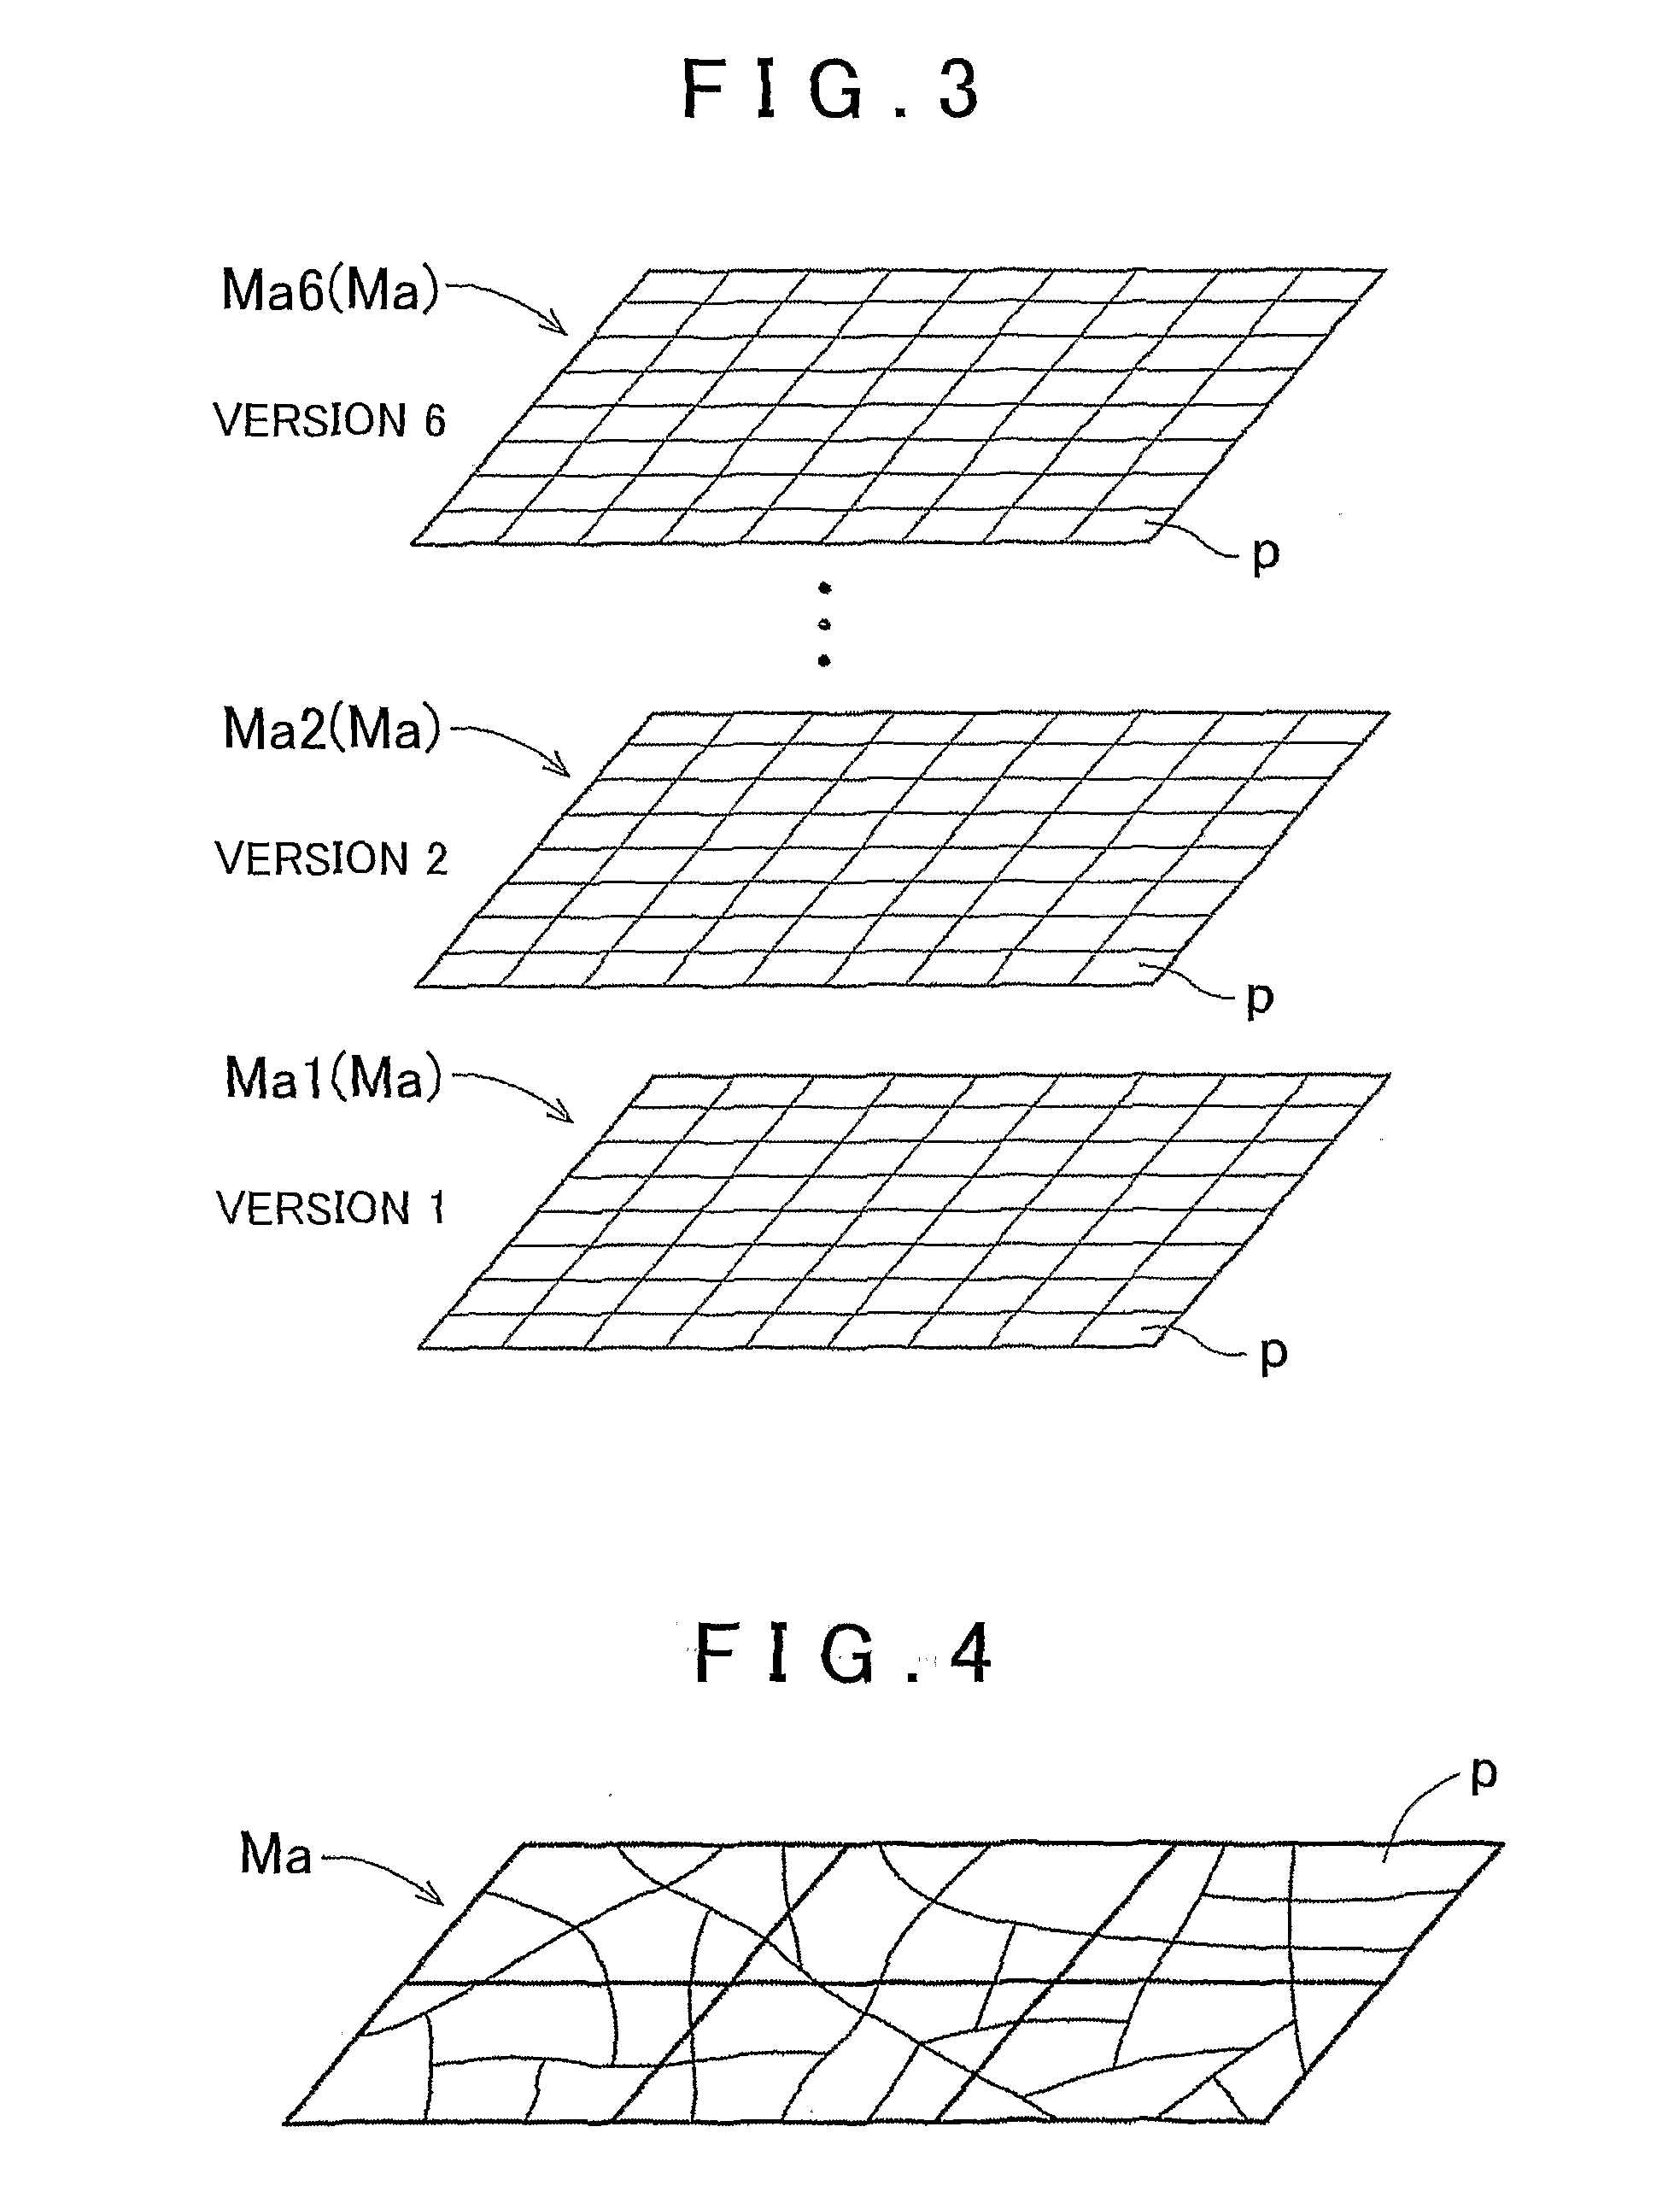 Map update data supplying apparatus, version table, map data updating system, and map update data supplying method